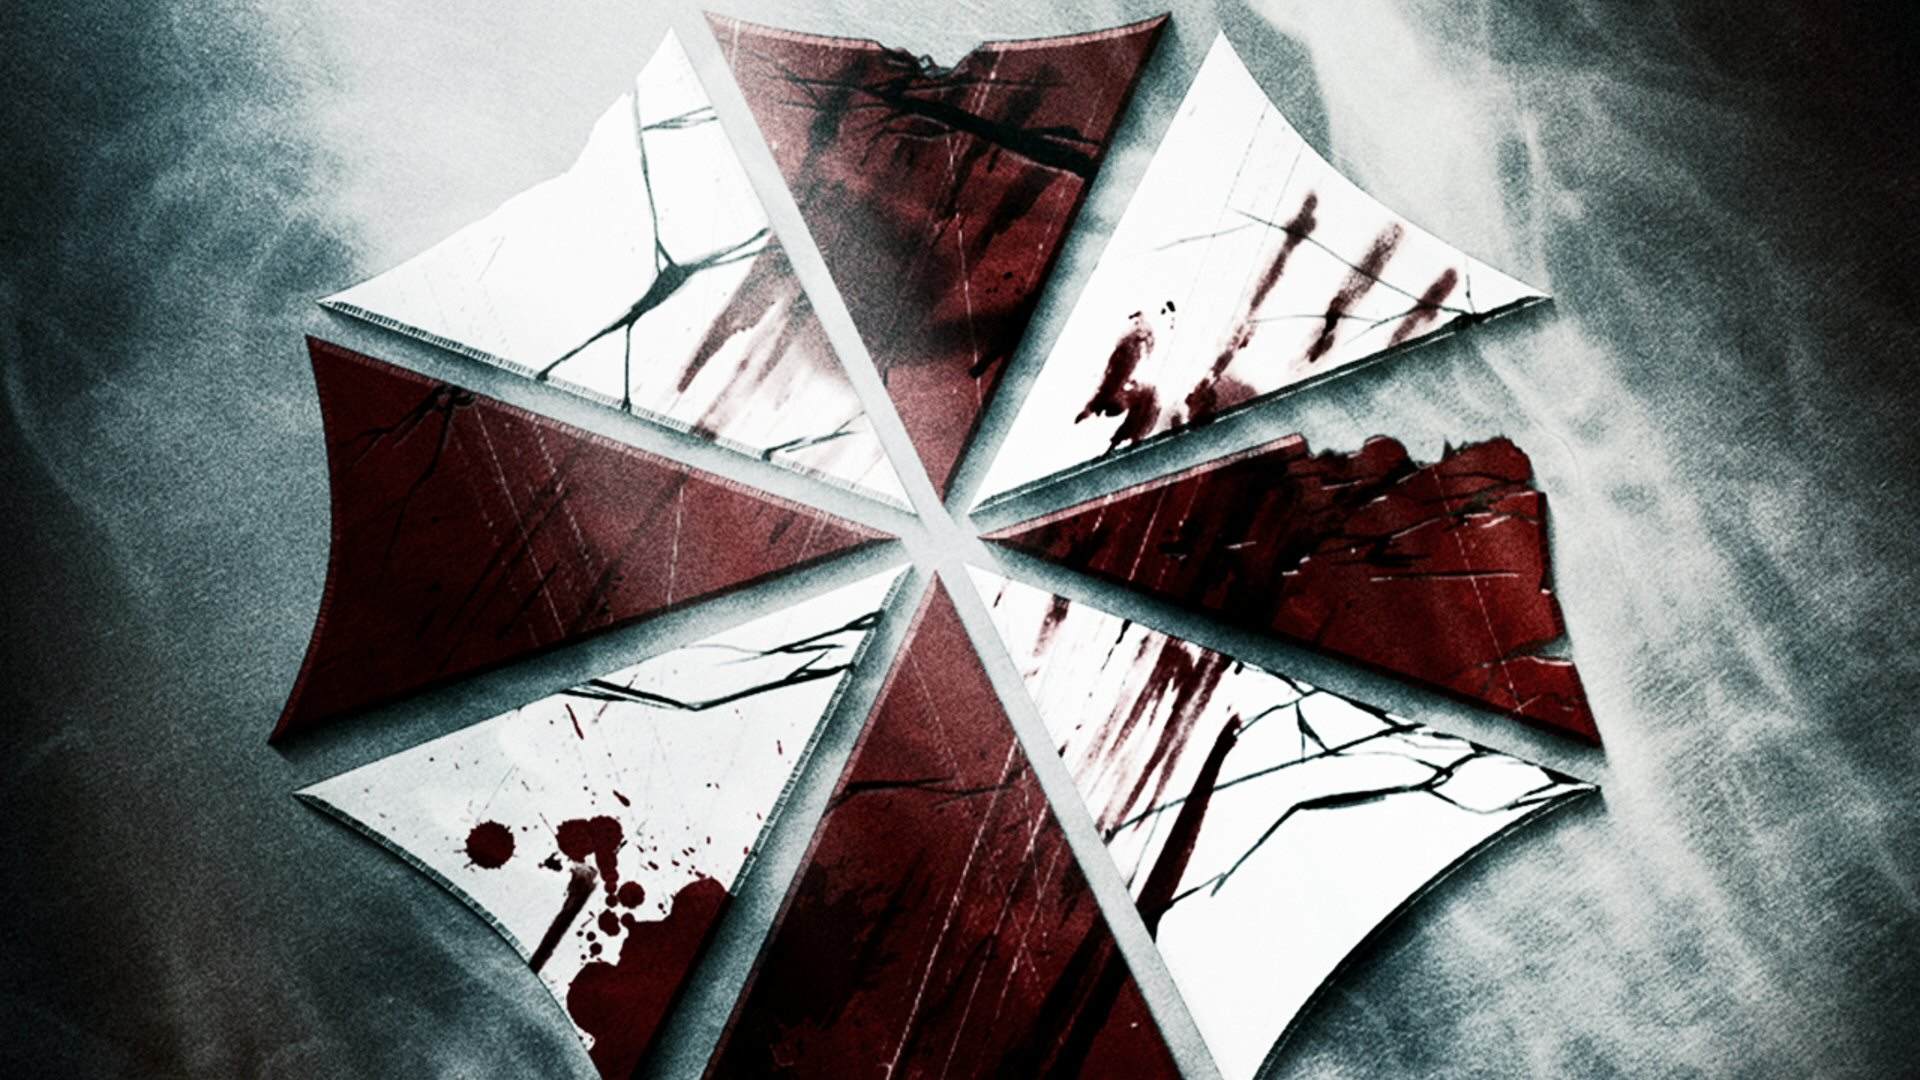 Video Game Resident Evil The Umbrella Chronicles 1920x1080